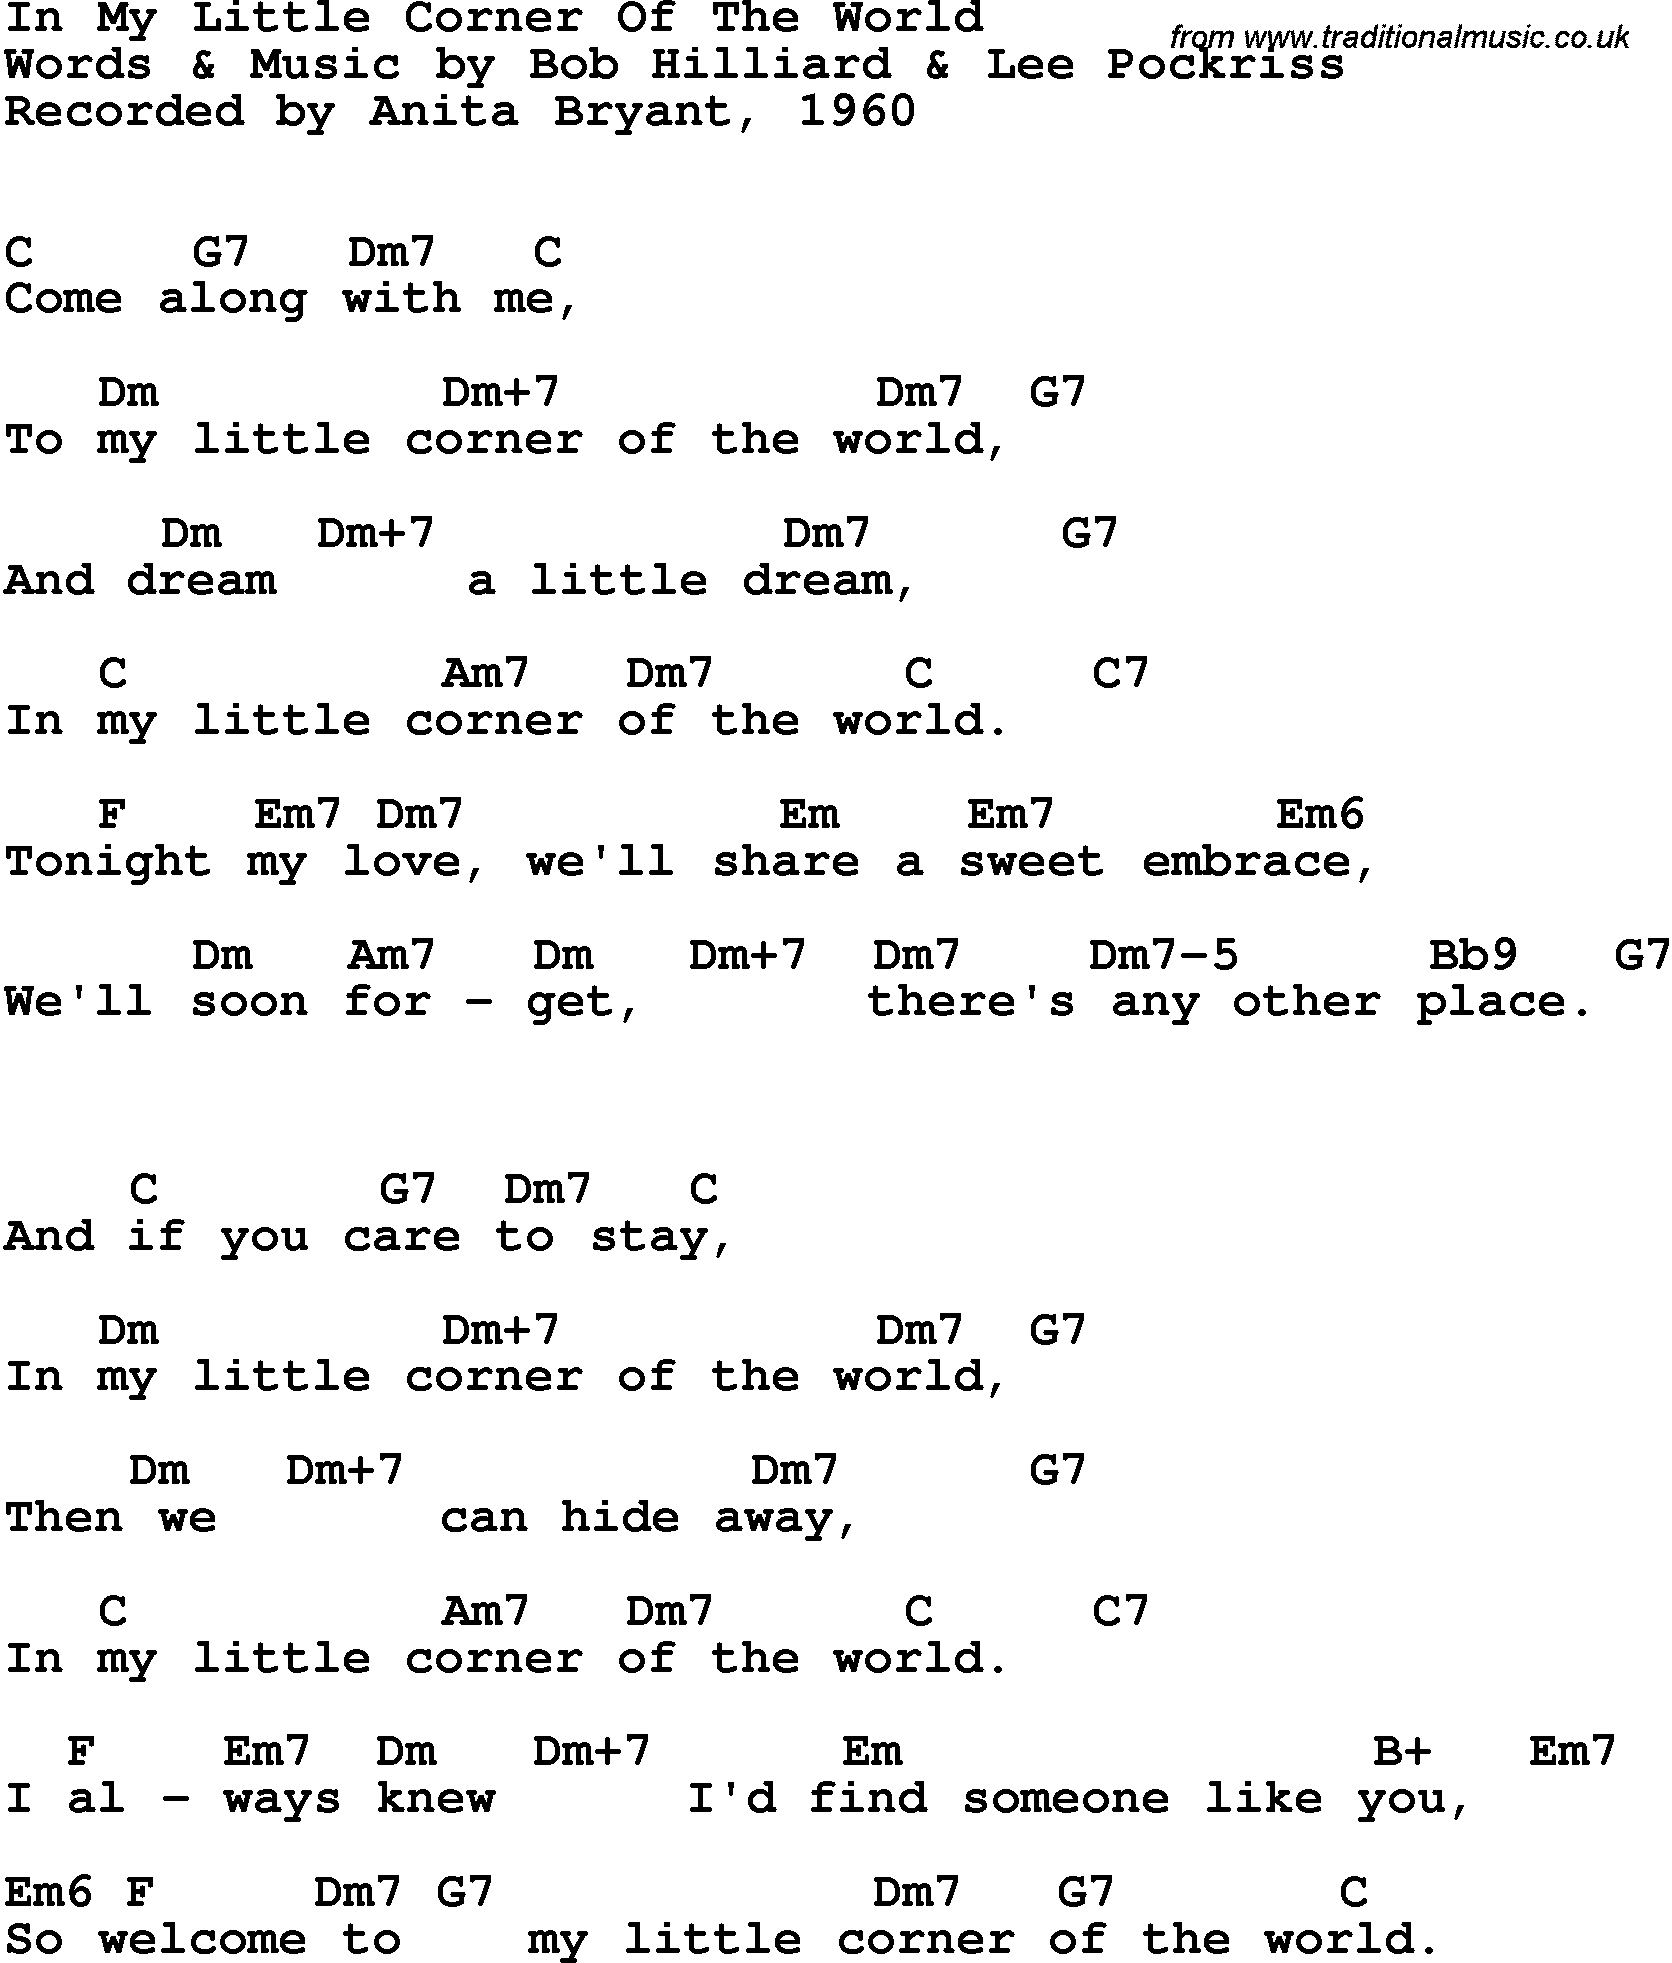 Song Lyrics with guitar chords for In My Little Corner Of The World - Anita Bryant, 1960